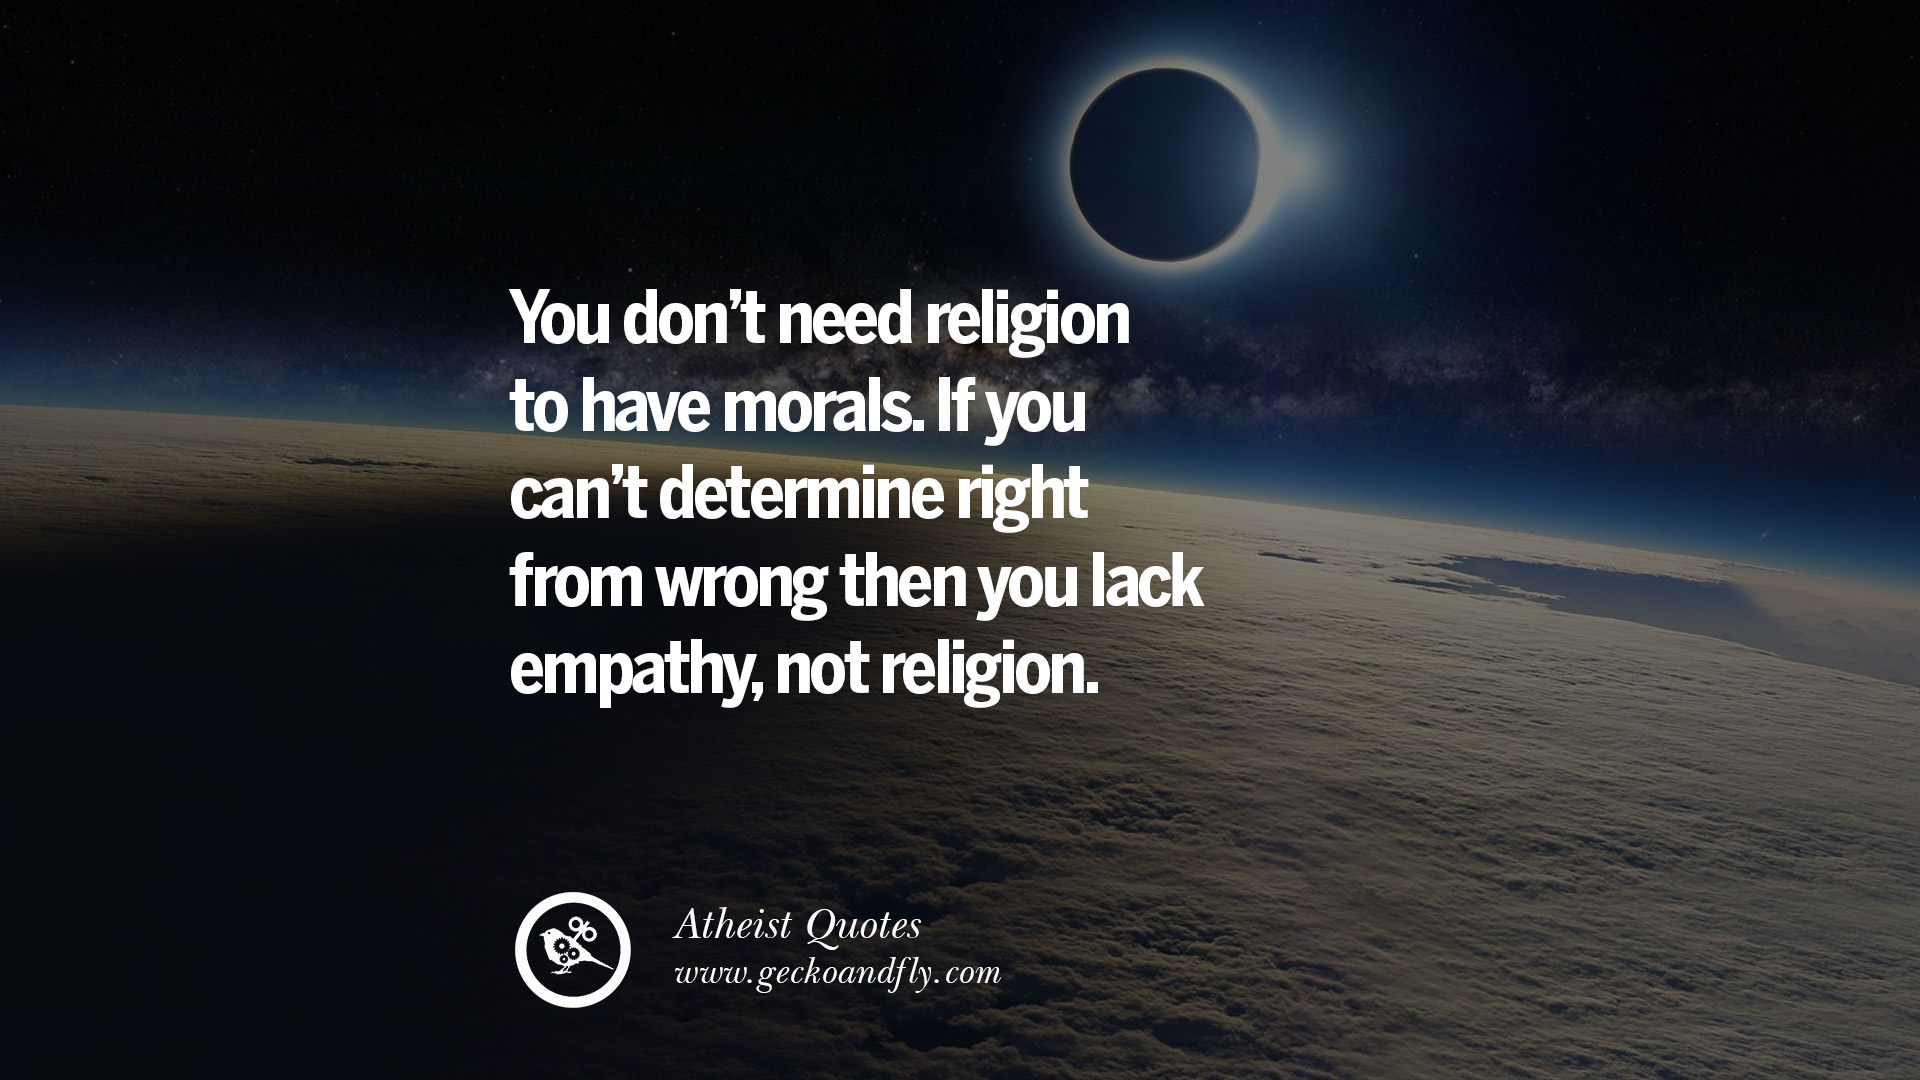 you don’t need religion to have morals. if you can’t determine right from wrong then you lack empathy not religion.